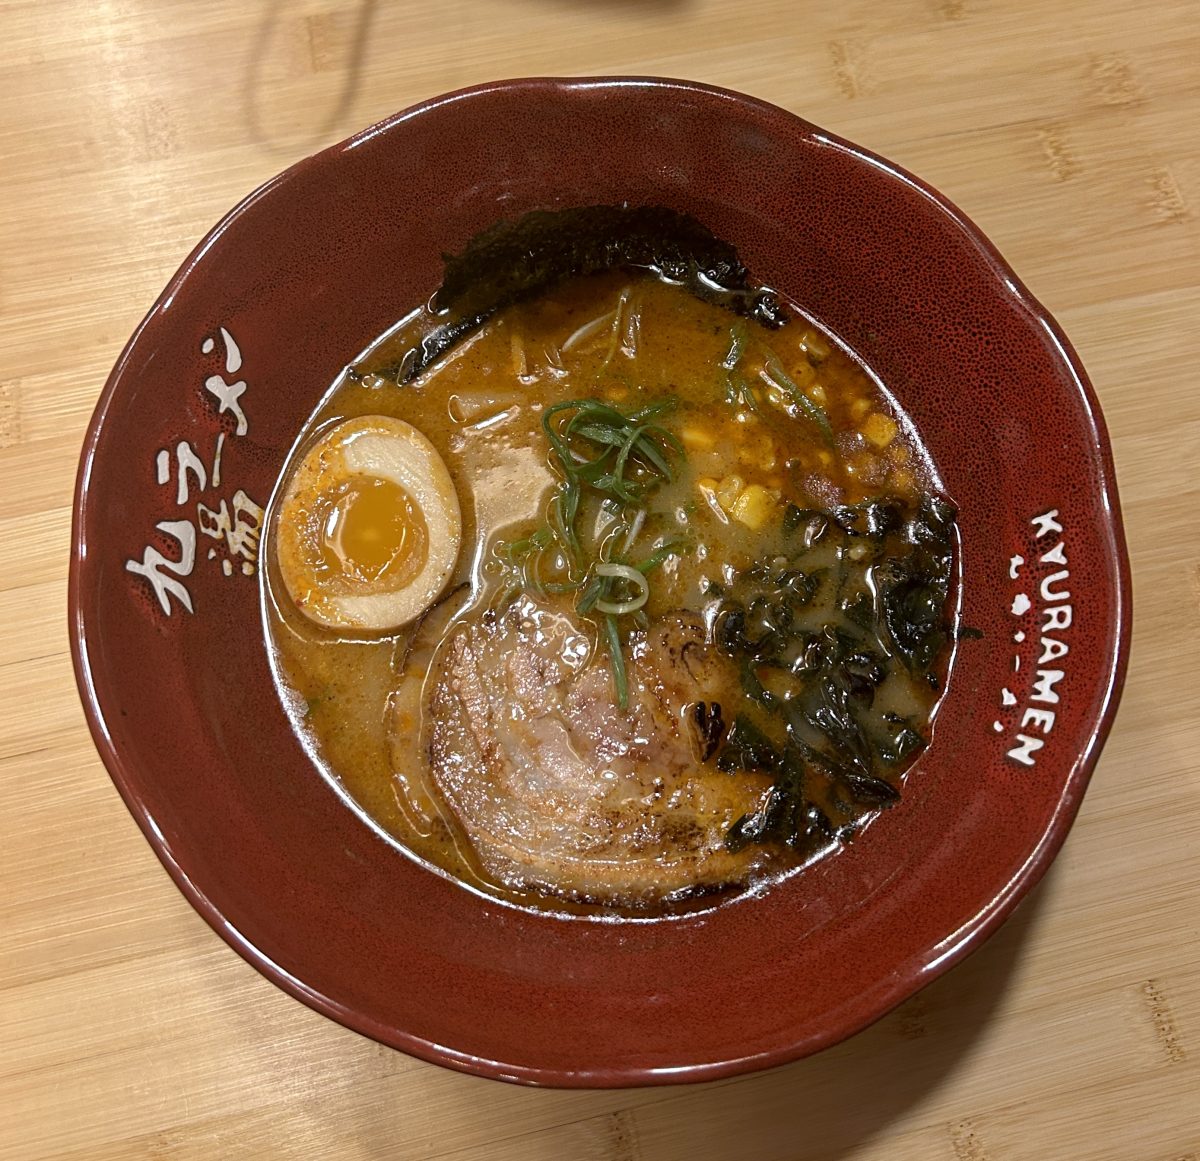 The+Spicy+Kyushu+Tonkotsu+Ramen+is+a+flavorful+blend+of+soft+pork%2C+salty+seaweed%2C+bamboo+shoots%2C+nori%2C+corn%2C+scallions%2C+and+half+a+boiled+egg%2C+tied+together+with+slightly+al+dente+ramen+noodles.